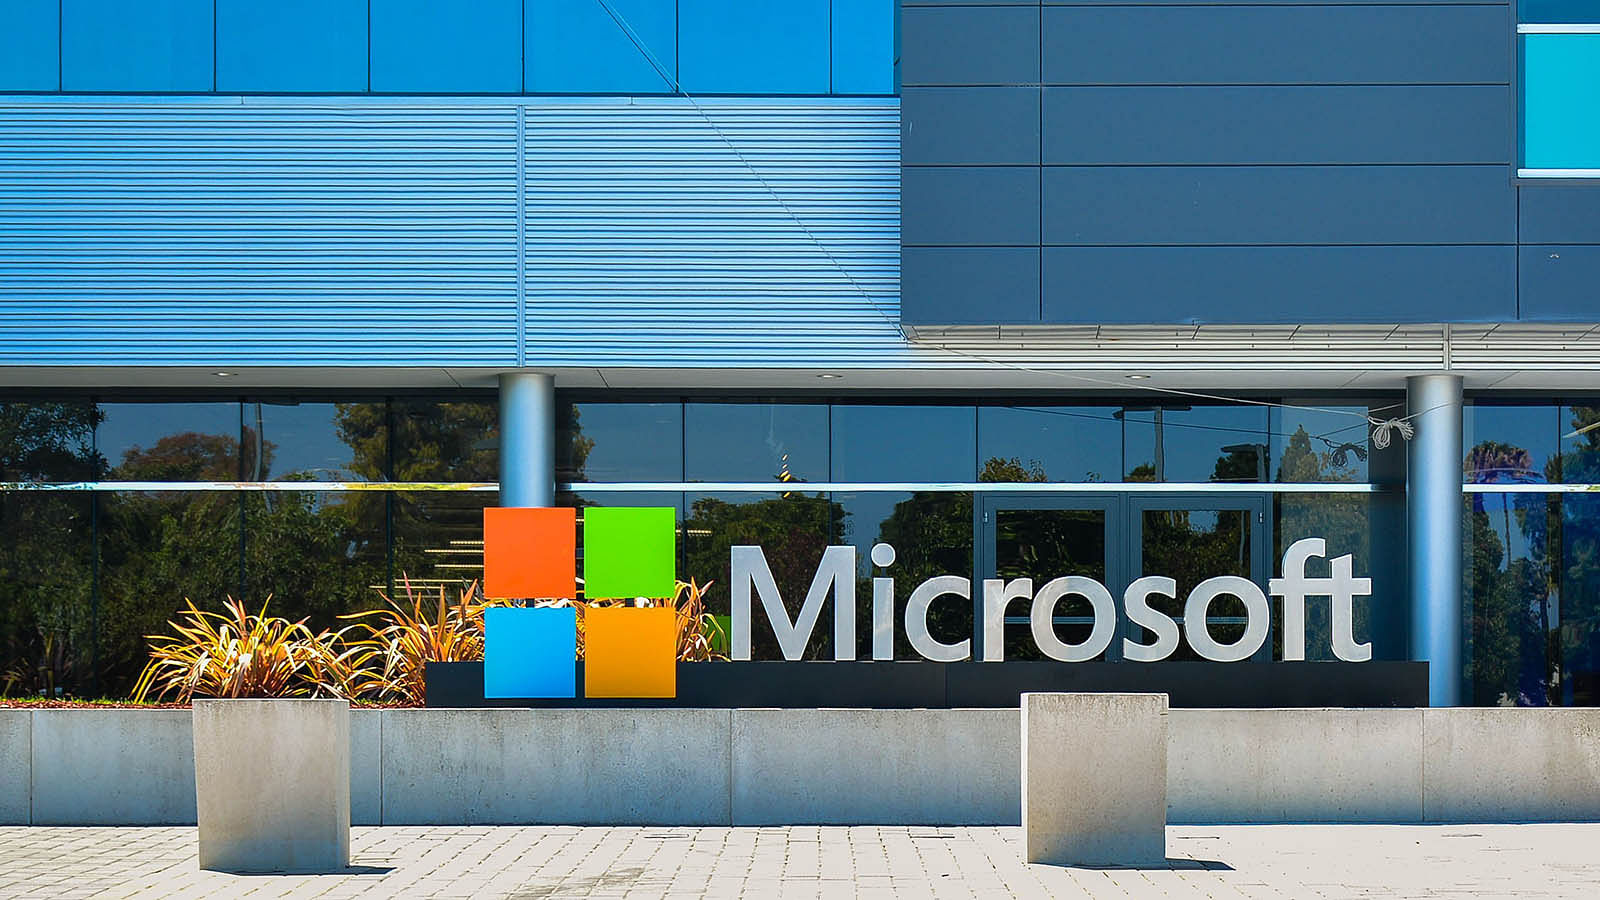 Microsoft is permanently closing its 83 retail stores.